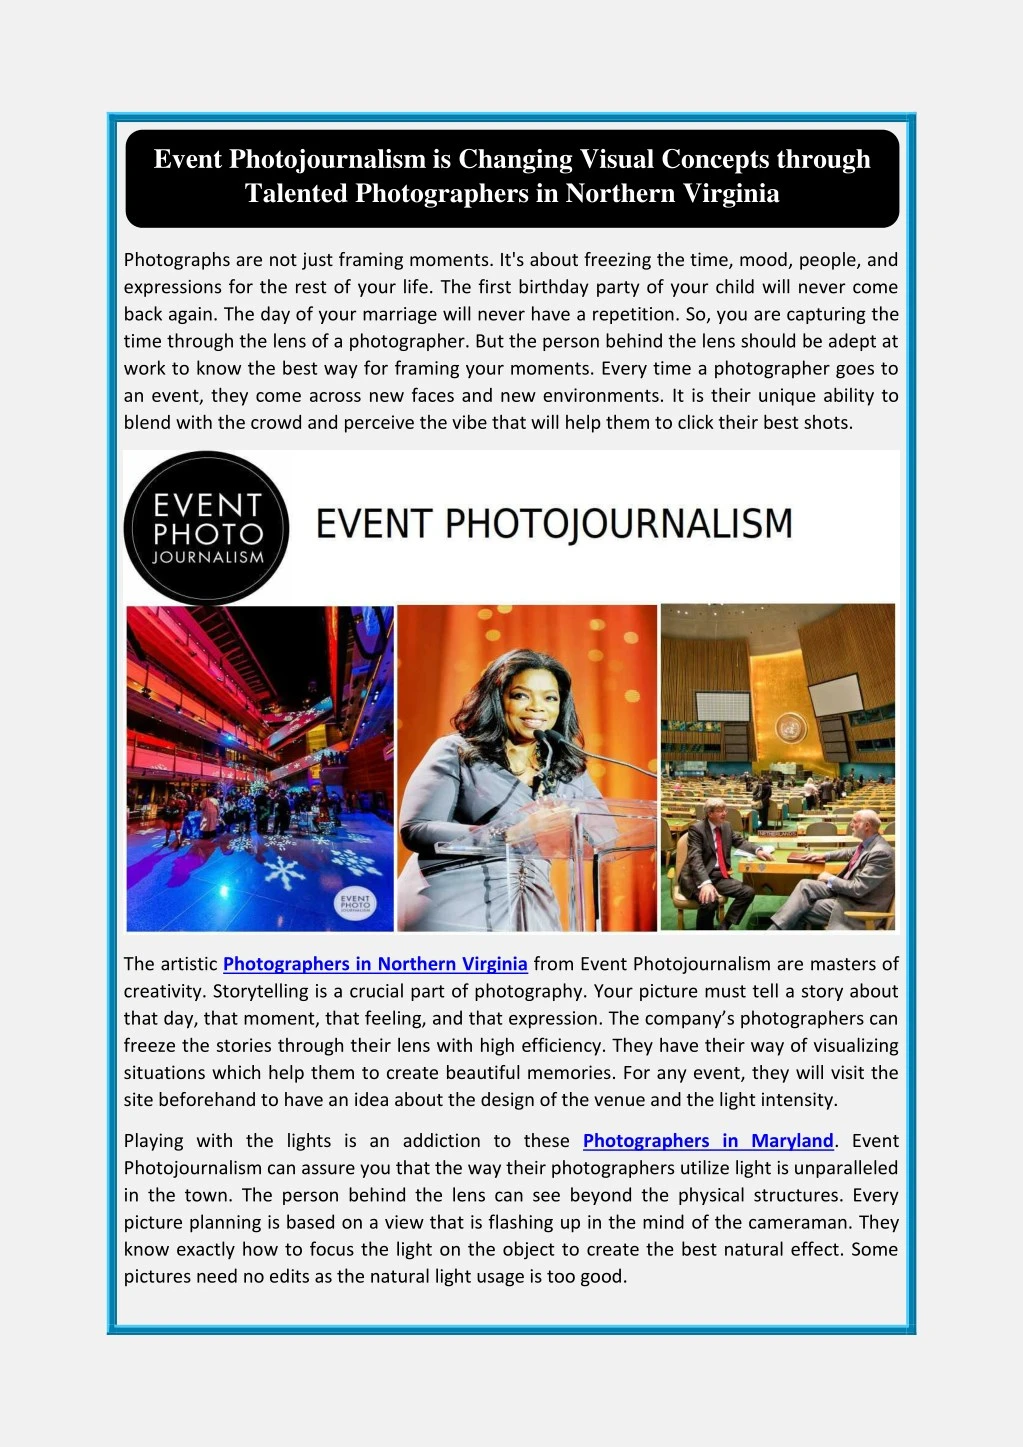 event photojournalism is changing visual concepts